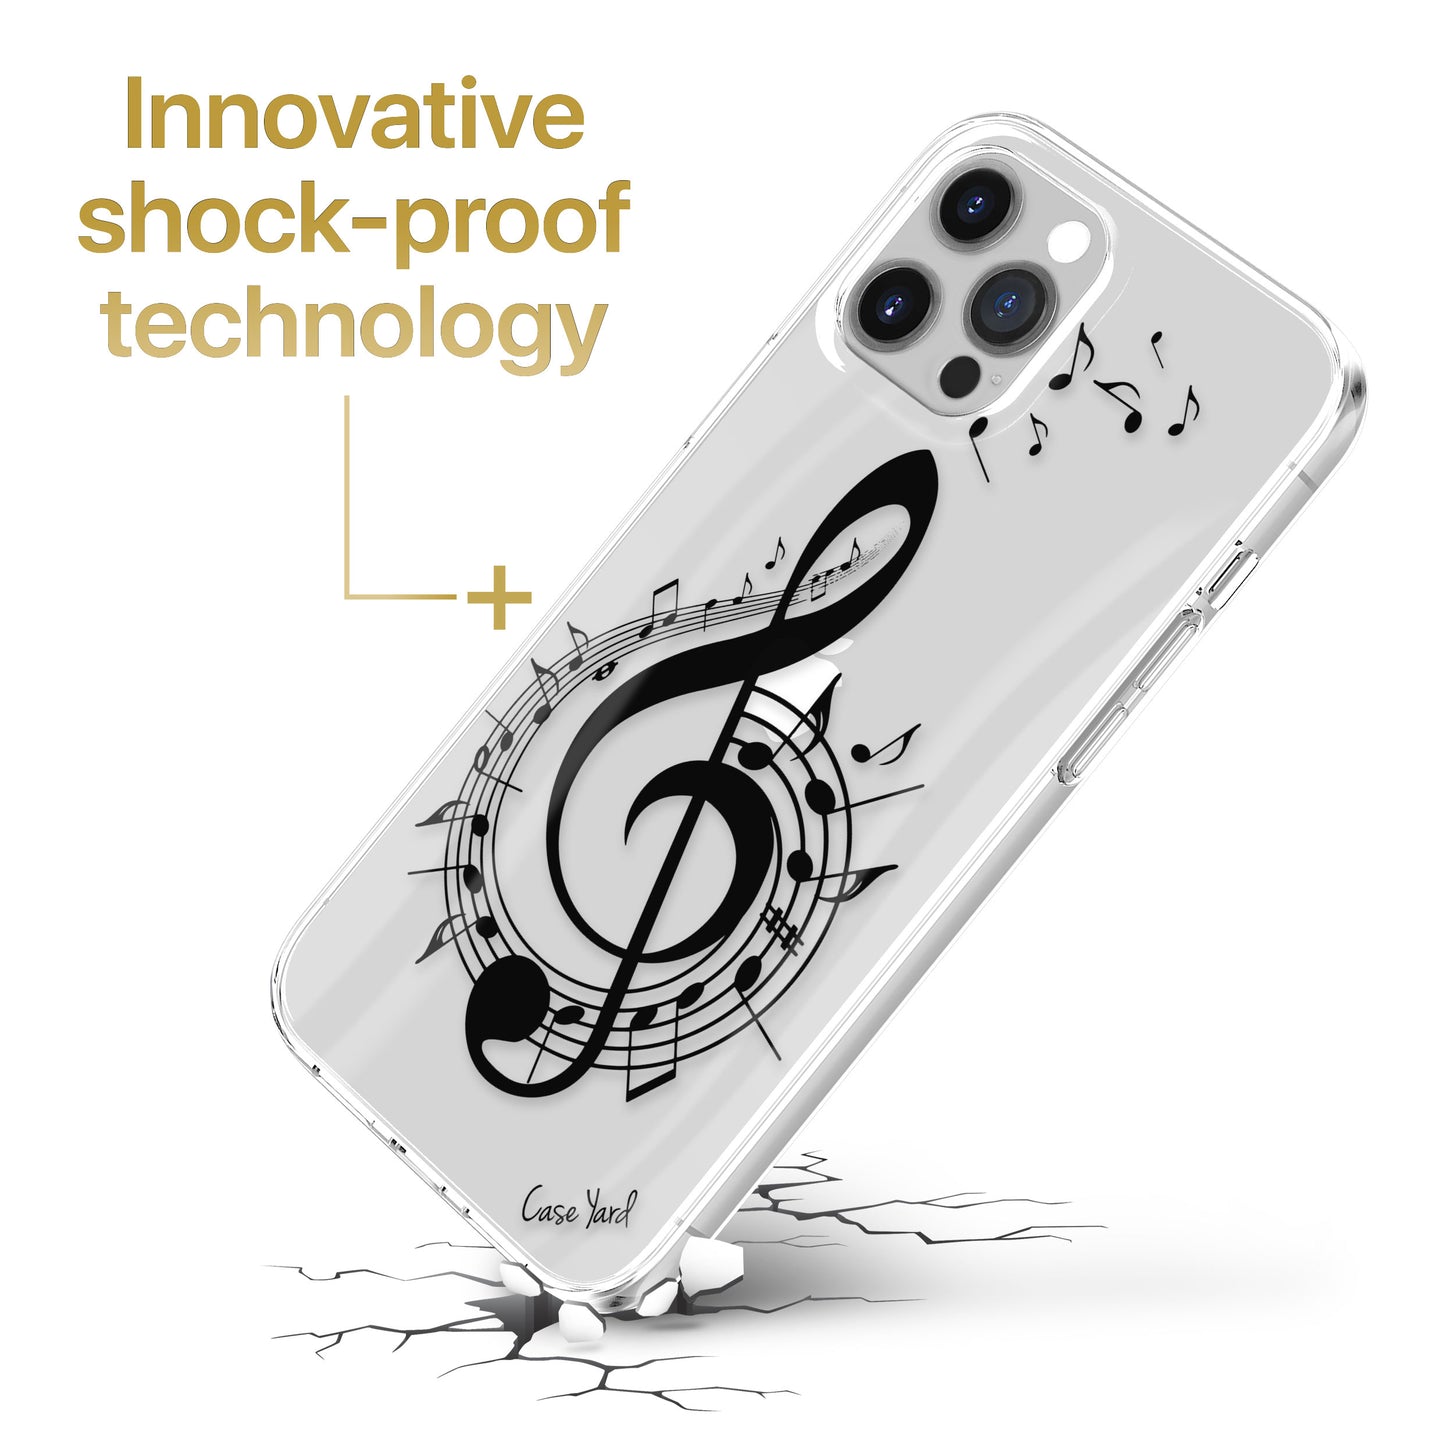 TPU Clear case with (Music 2) Design for iPhone & Samsung Phones